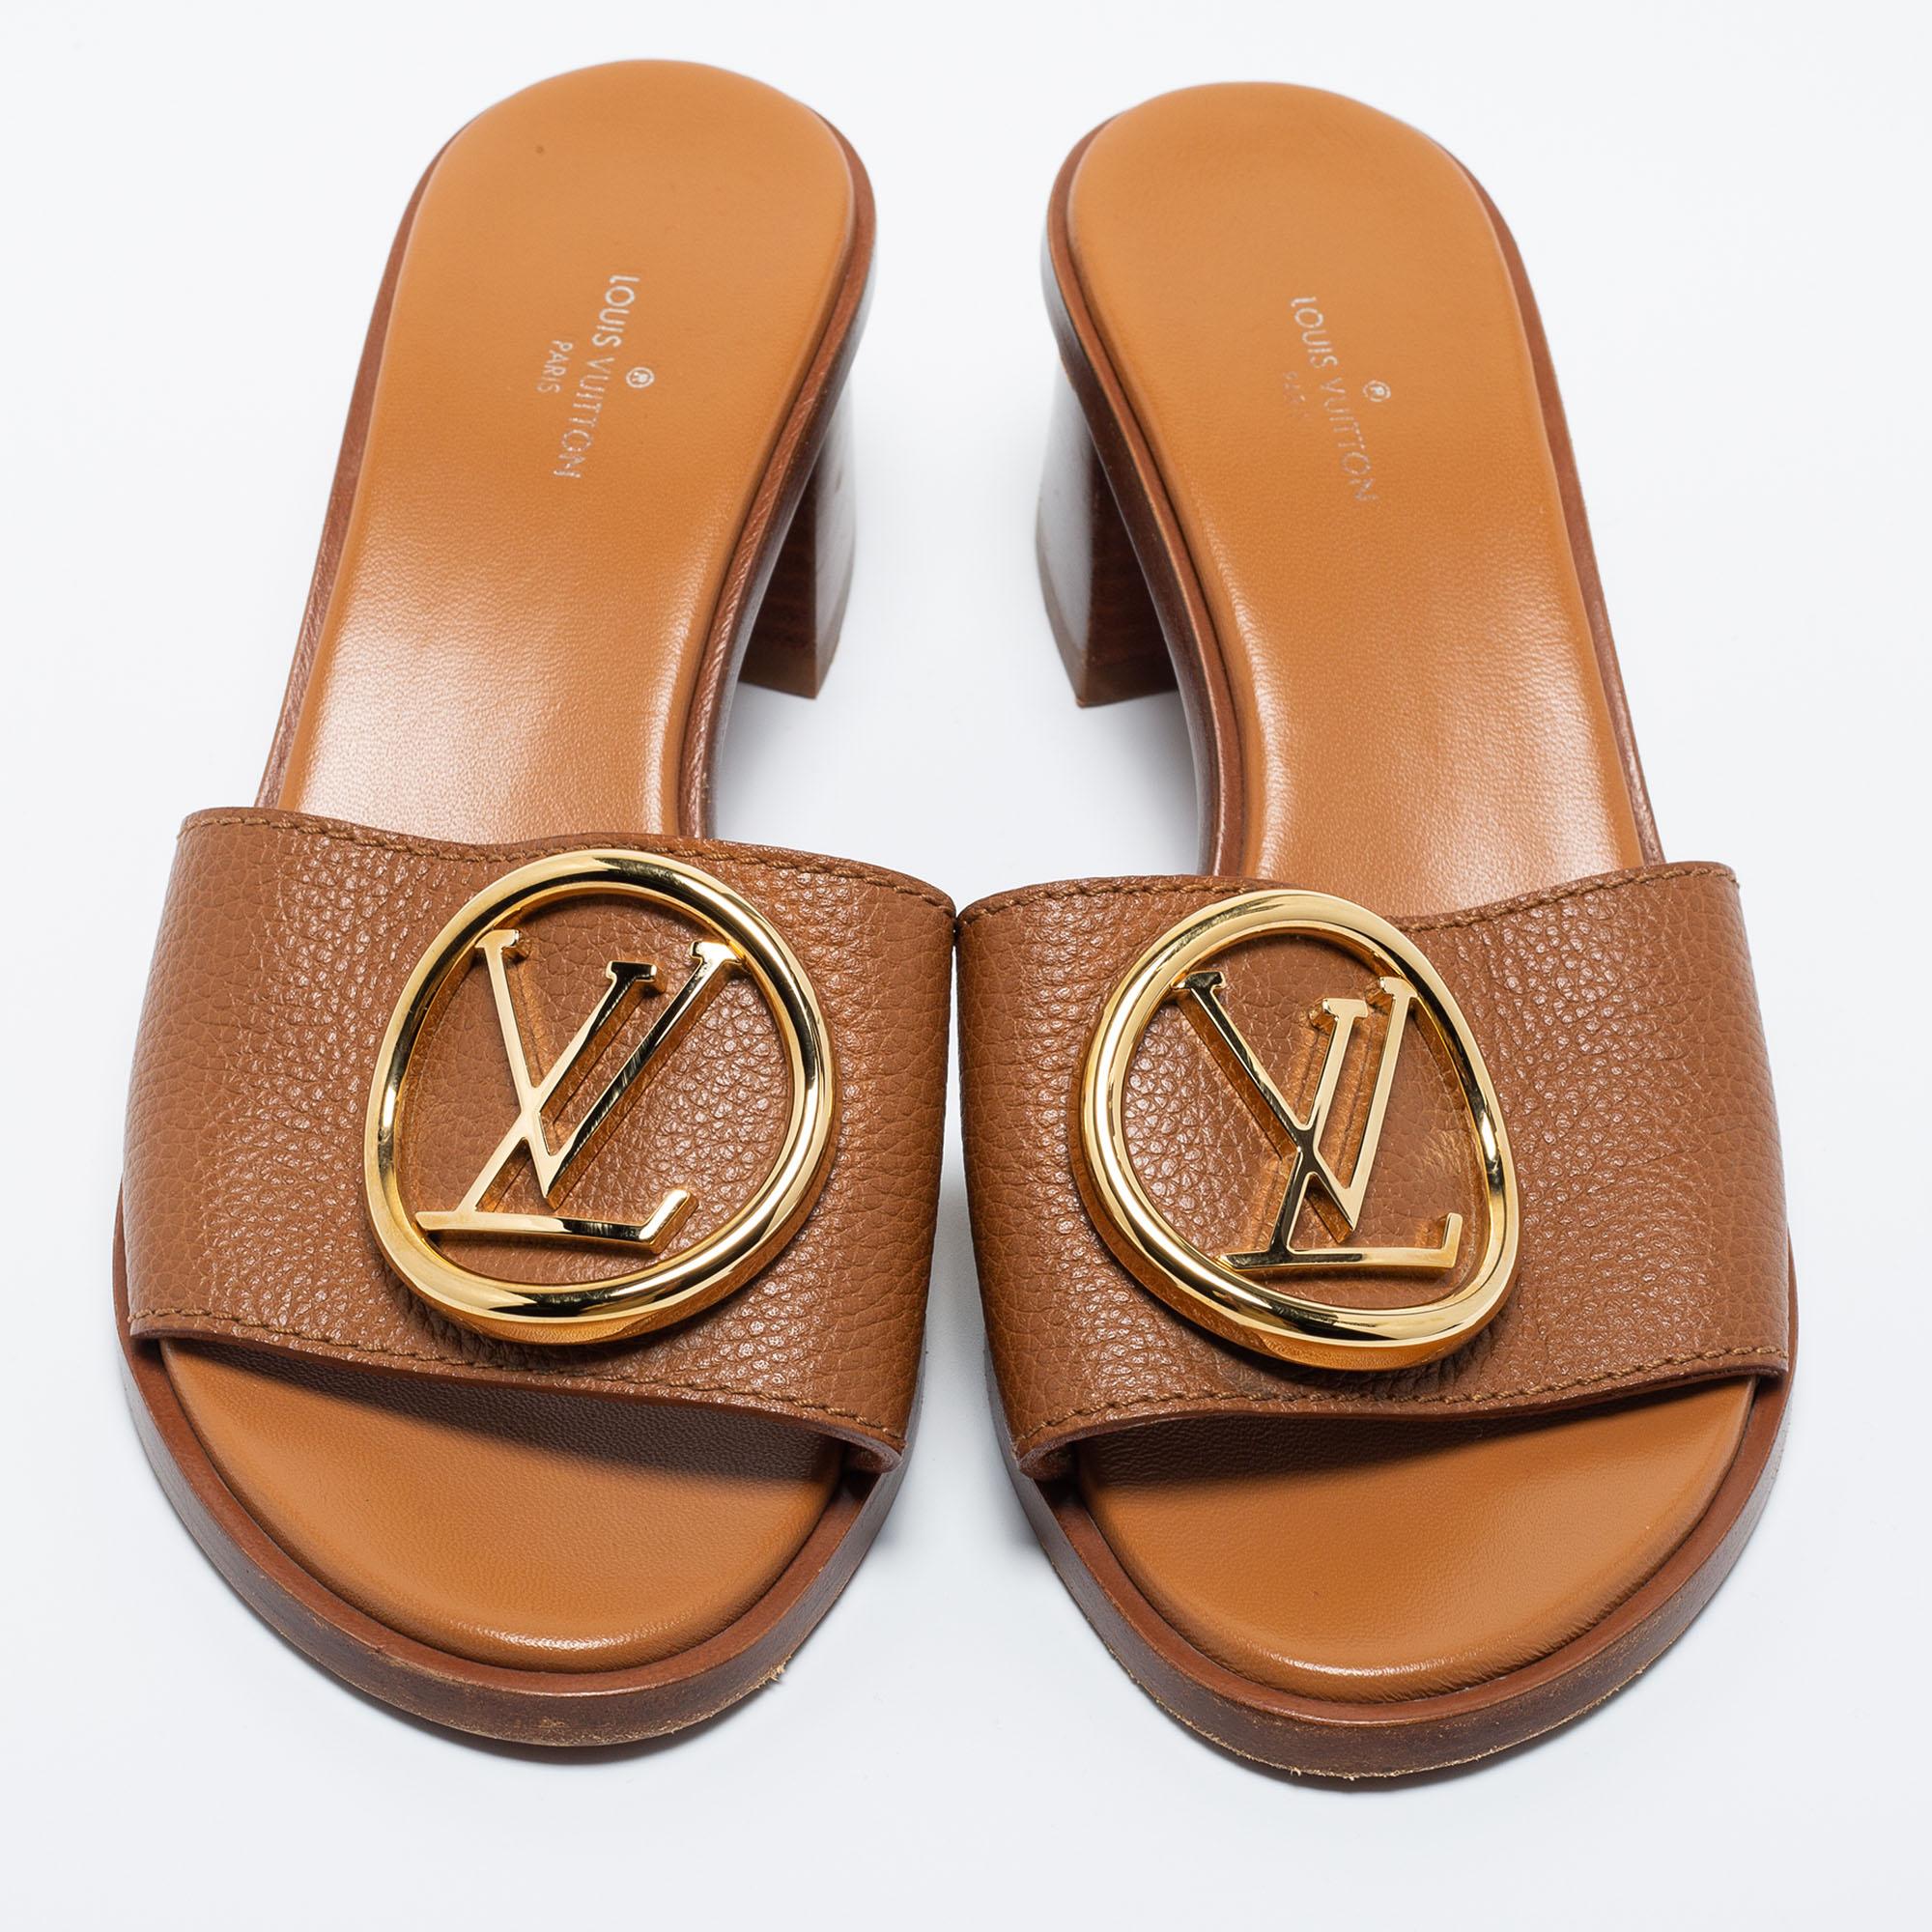 Louis Vuitton - Authenticated Lock It Sandal - Leather Brown for Women, Good Condition